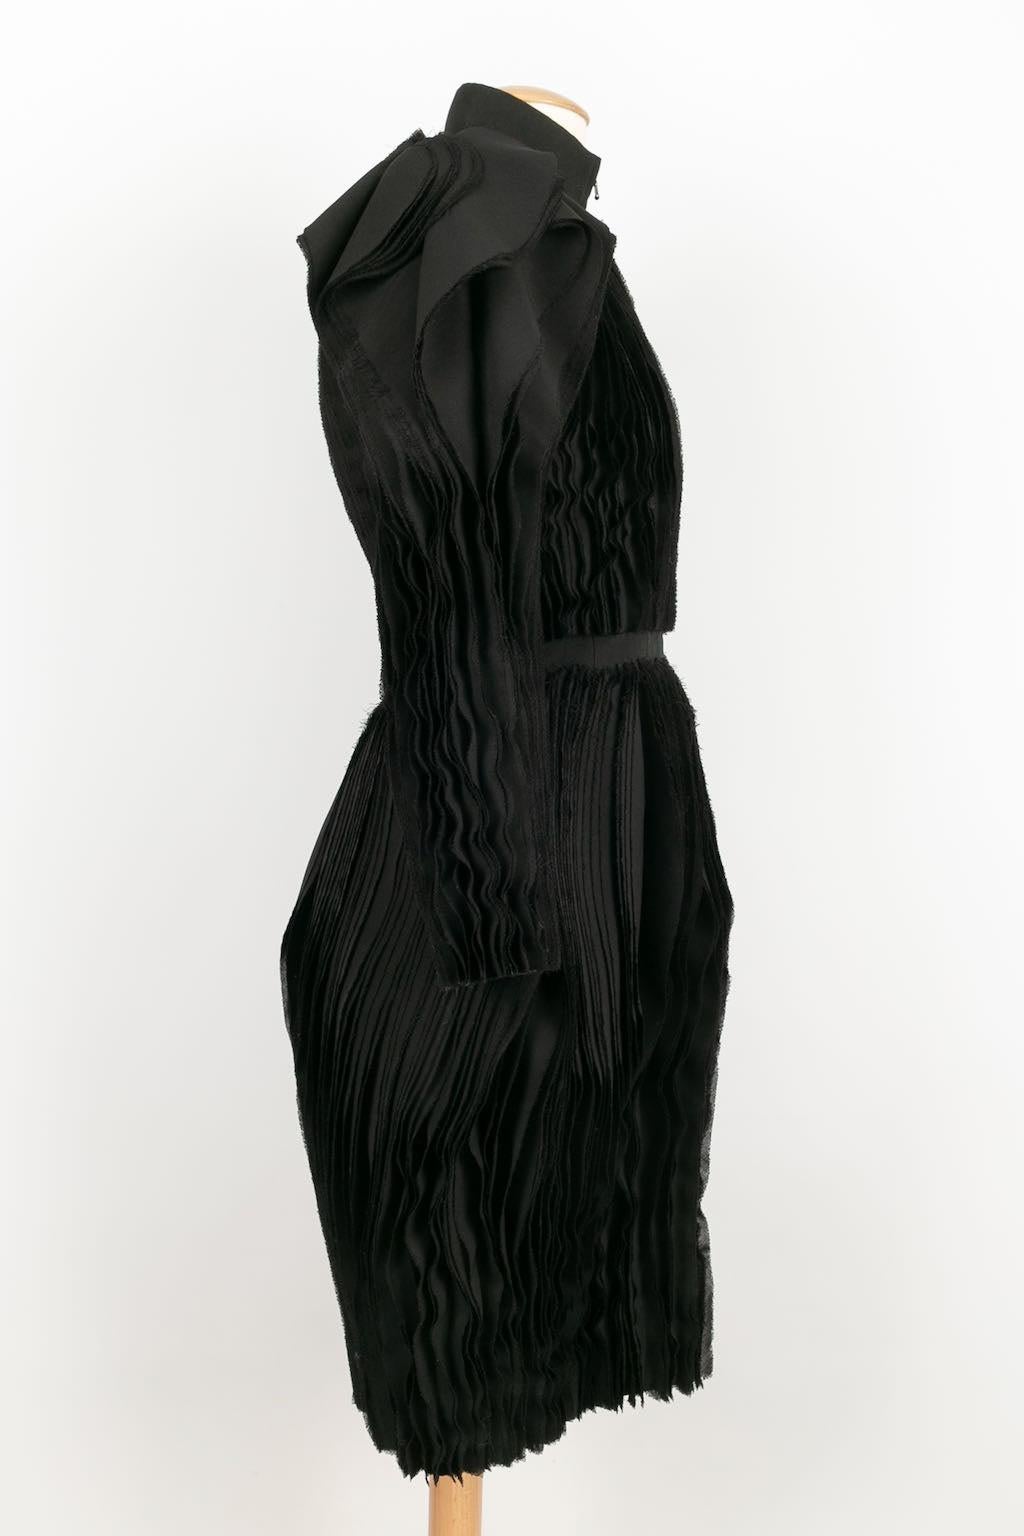 Women's Incredible Boulle Dress Jean-Paul Gaultier Couture For Sale